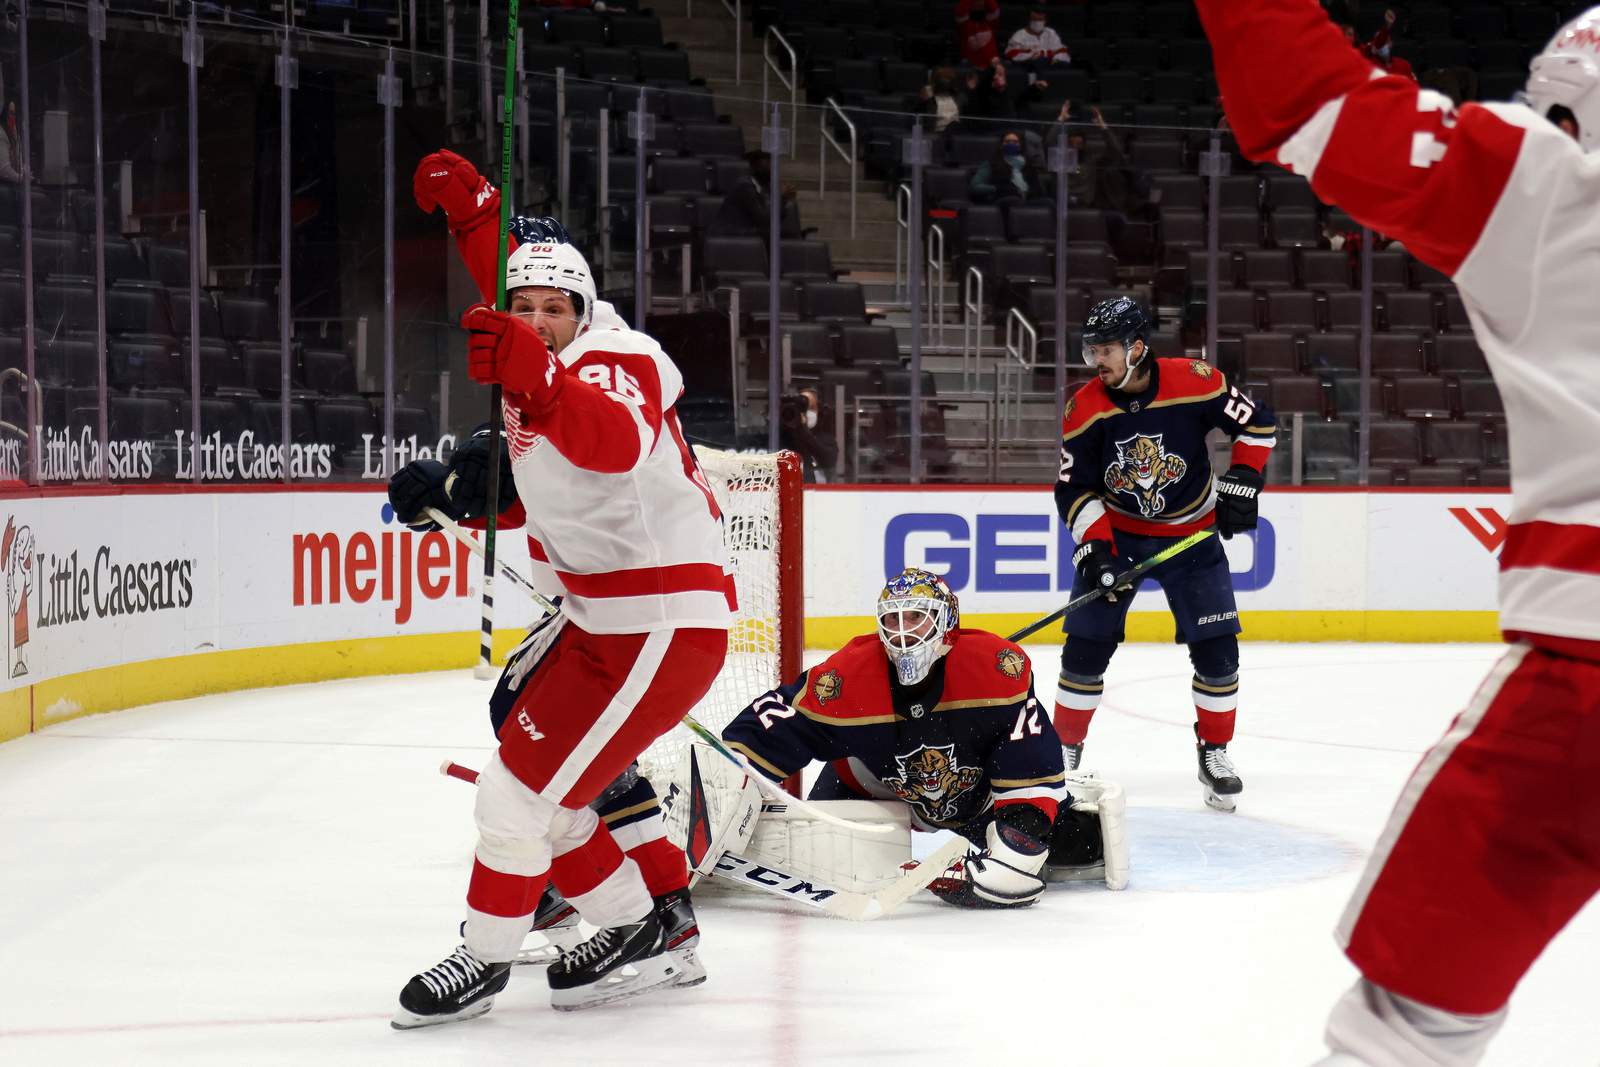 Red Wings hold off Panthers 2-1 after Brome’s 1st NHL goal